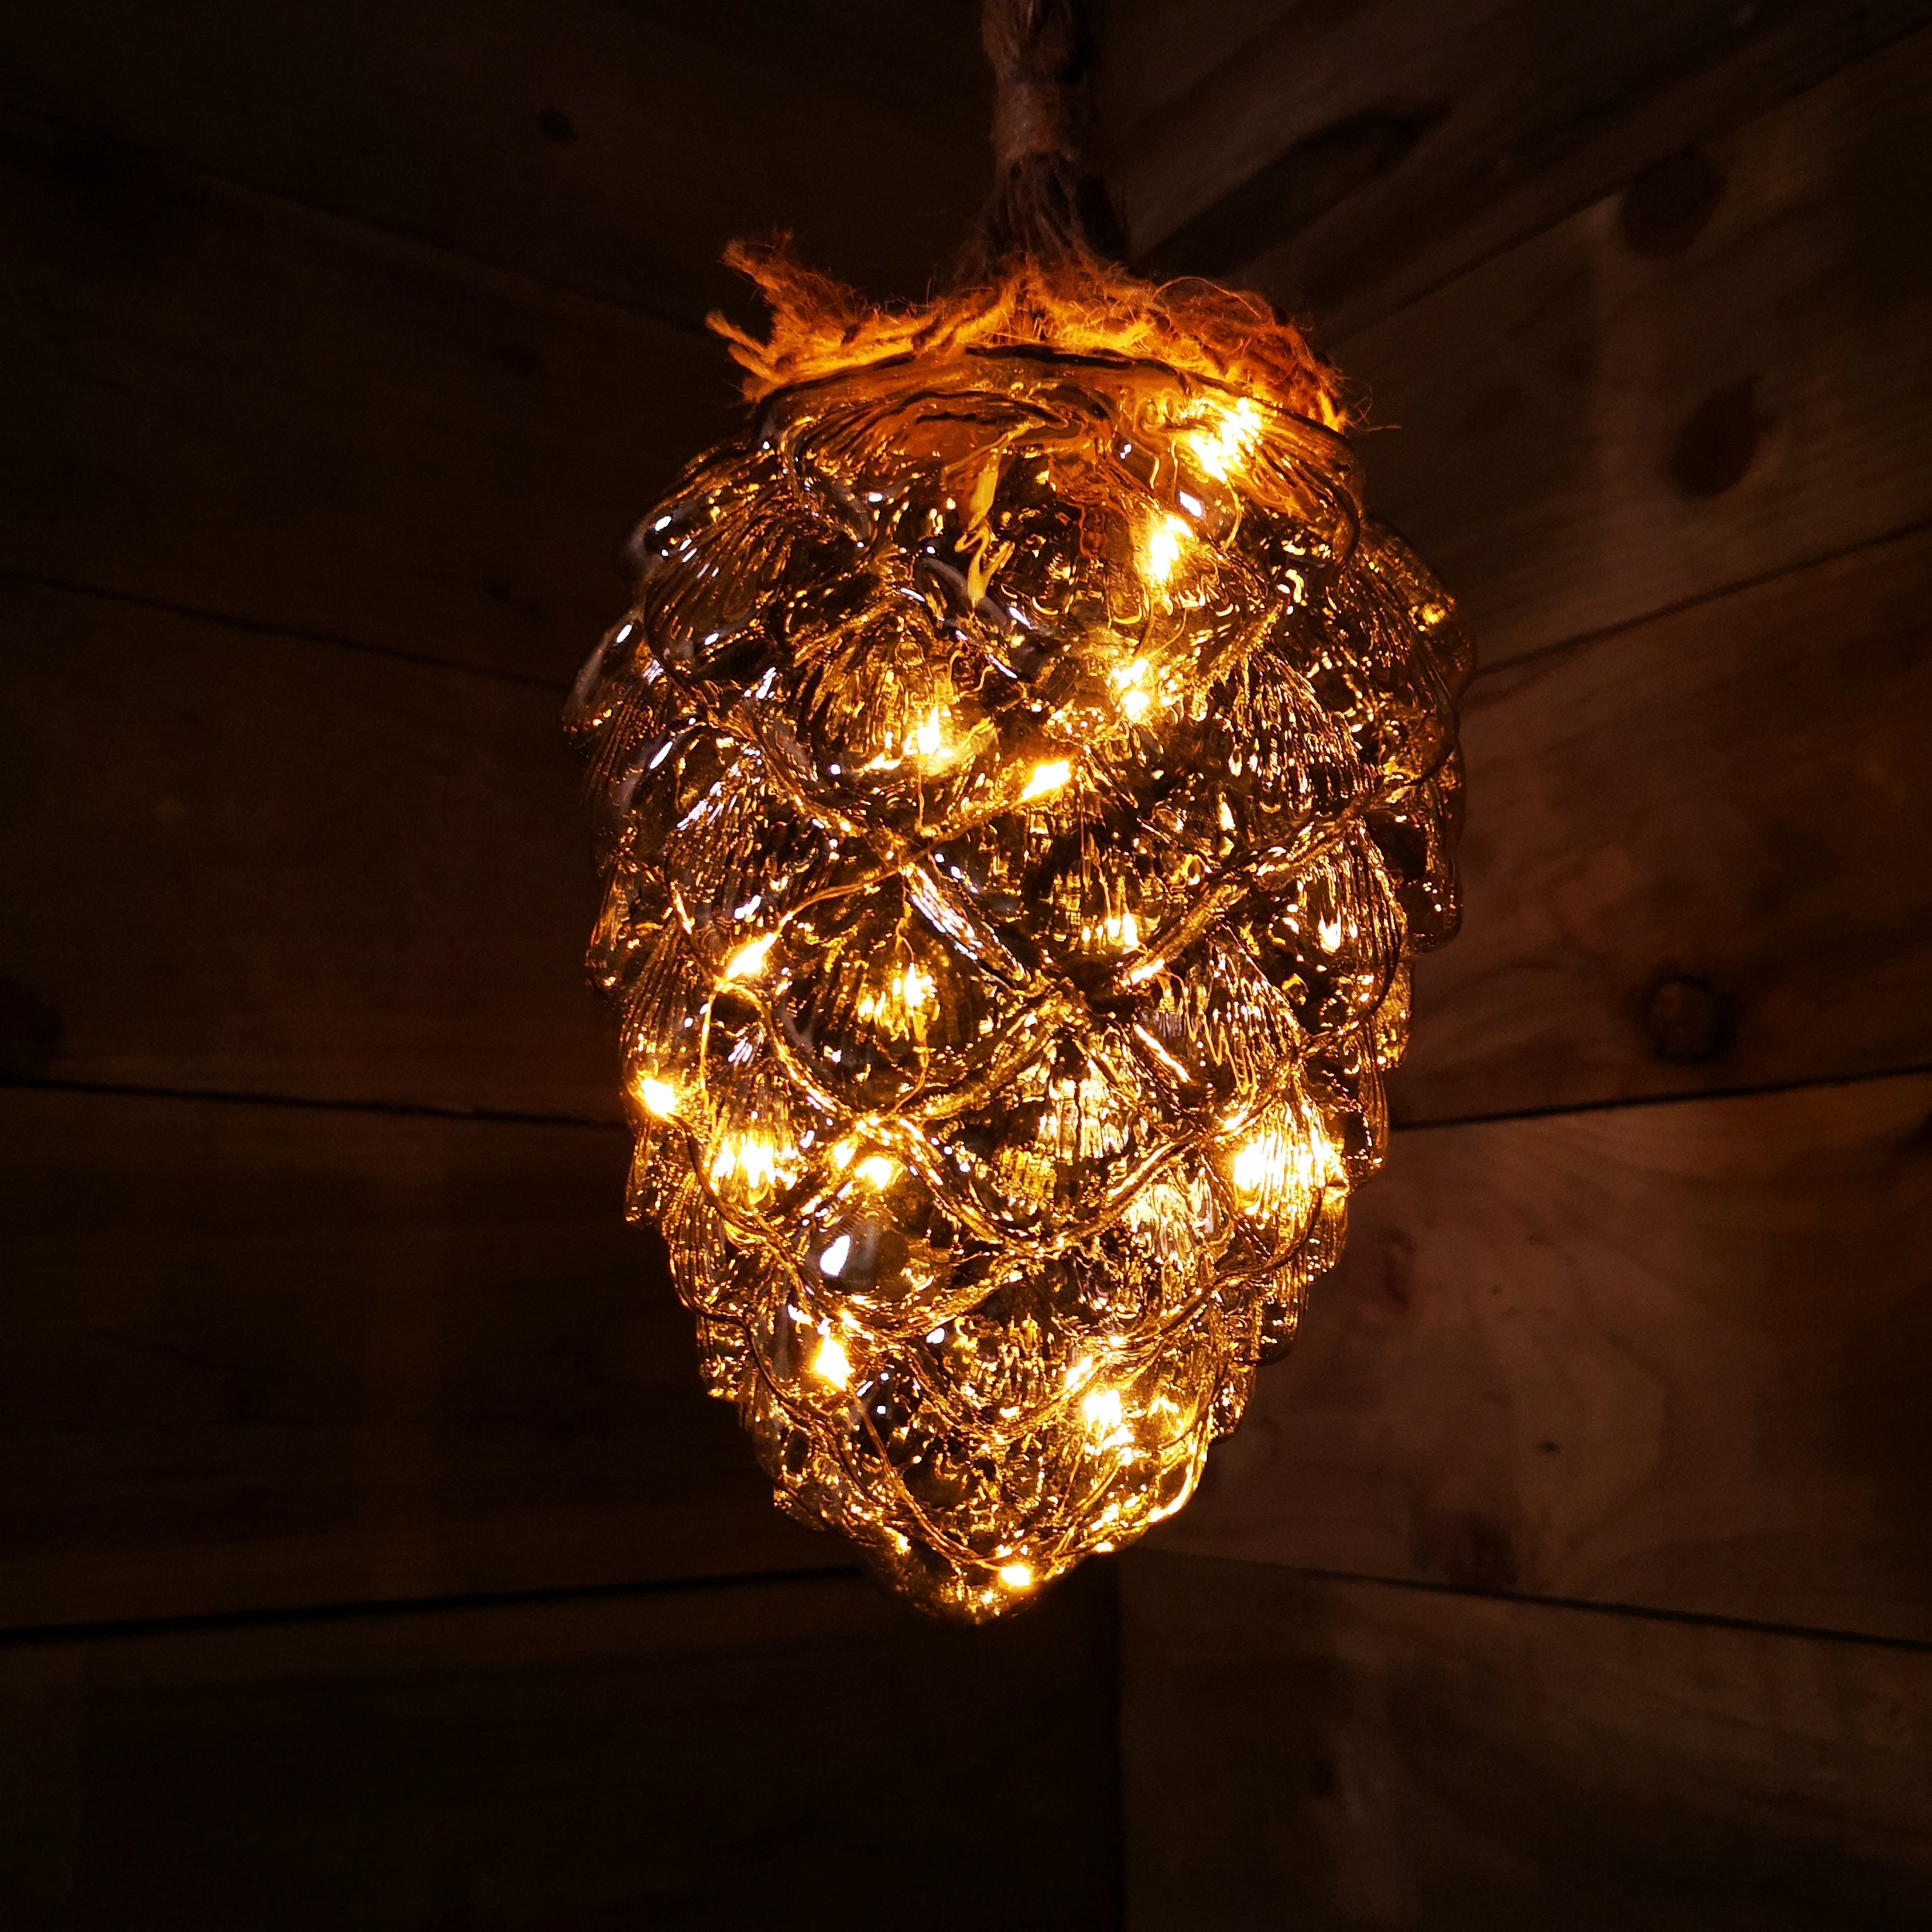 15cm Large Silver LED Hanging Pine Cone Christmas Decoration Display Ornament